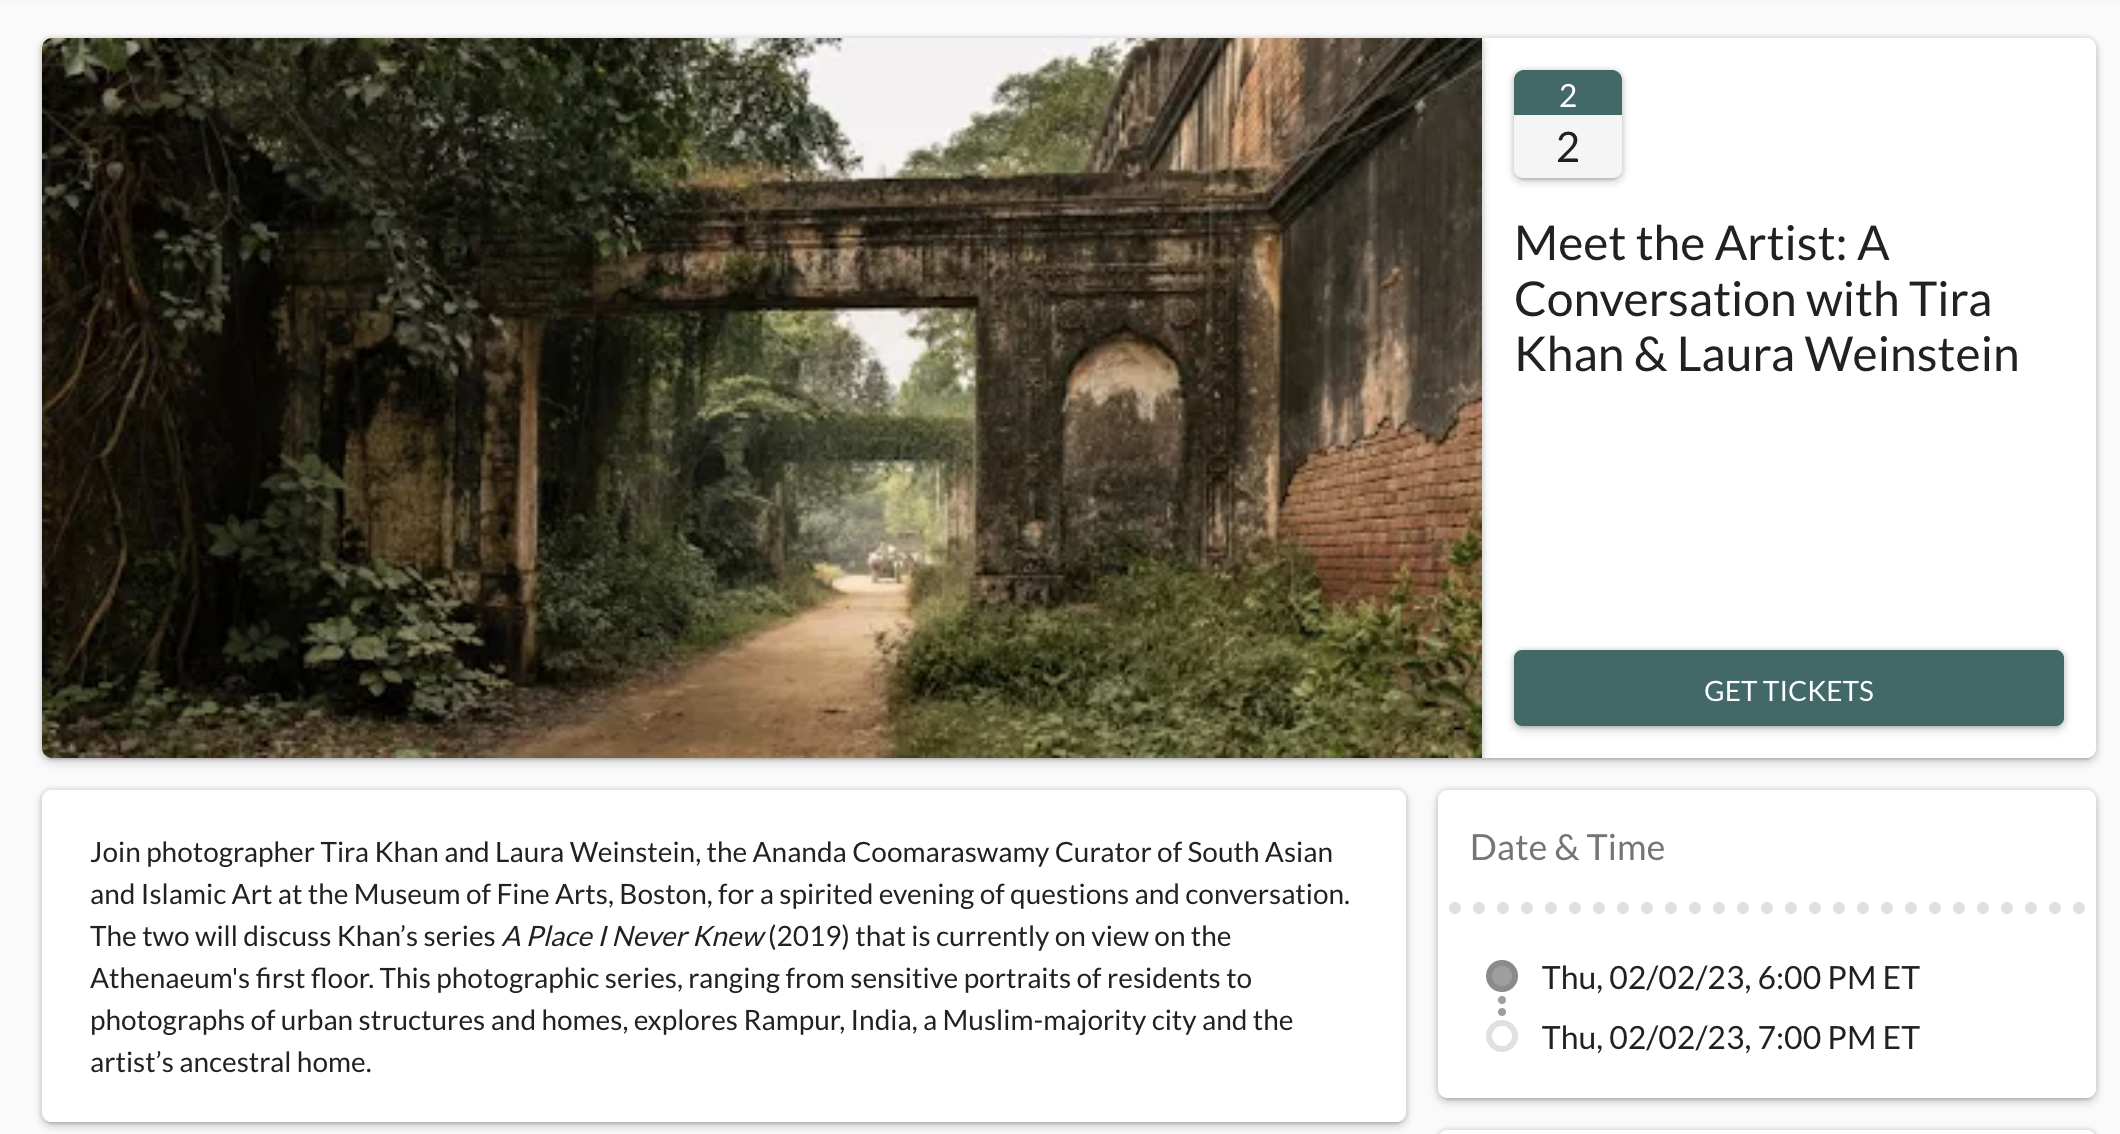 Exhibition and conversation with MFA curator on India series